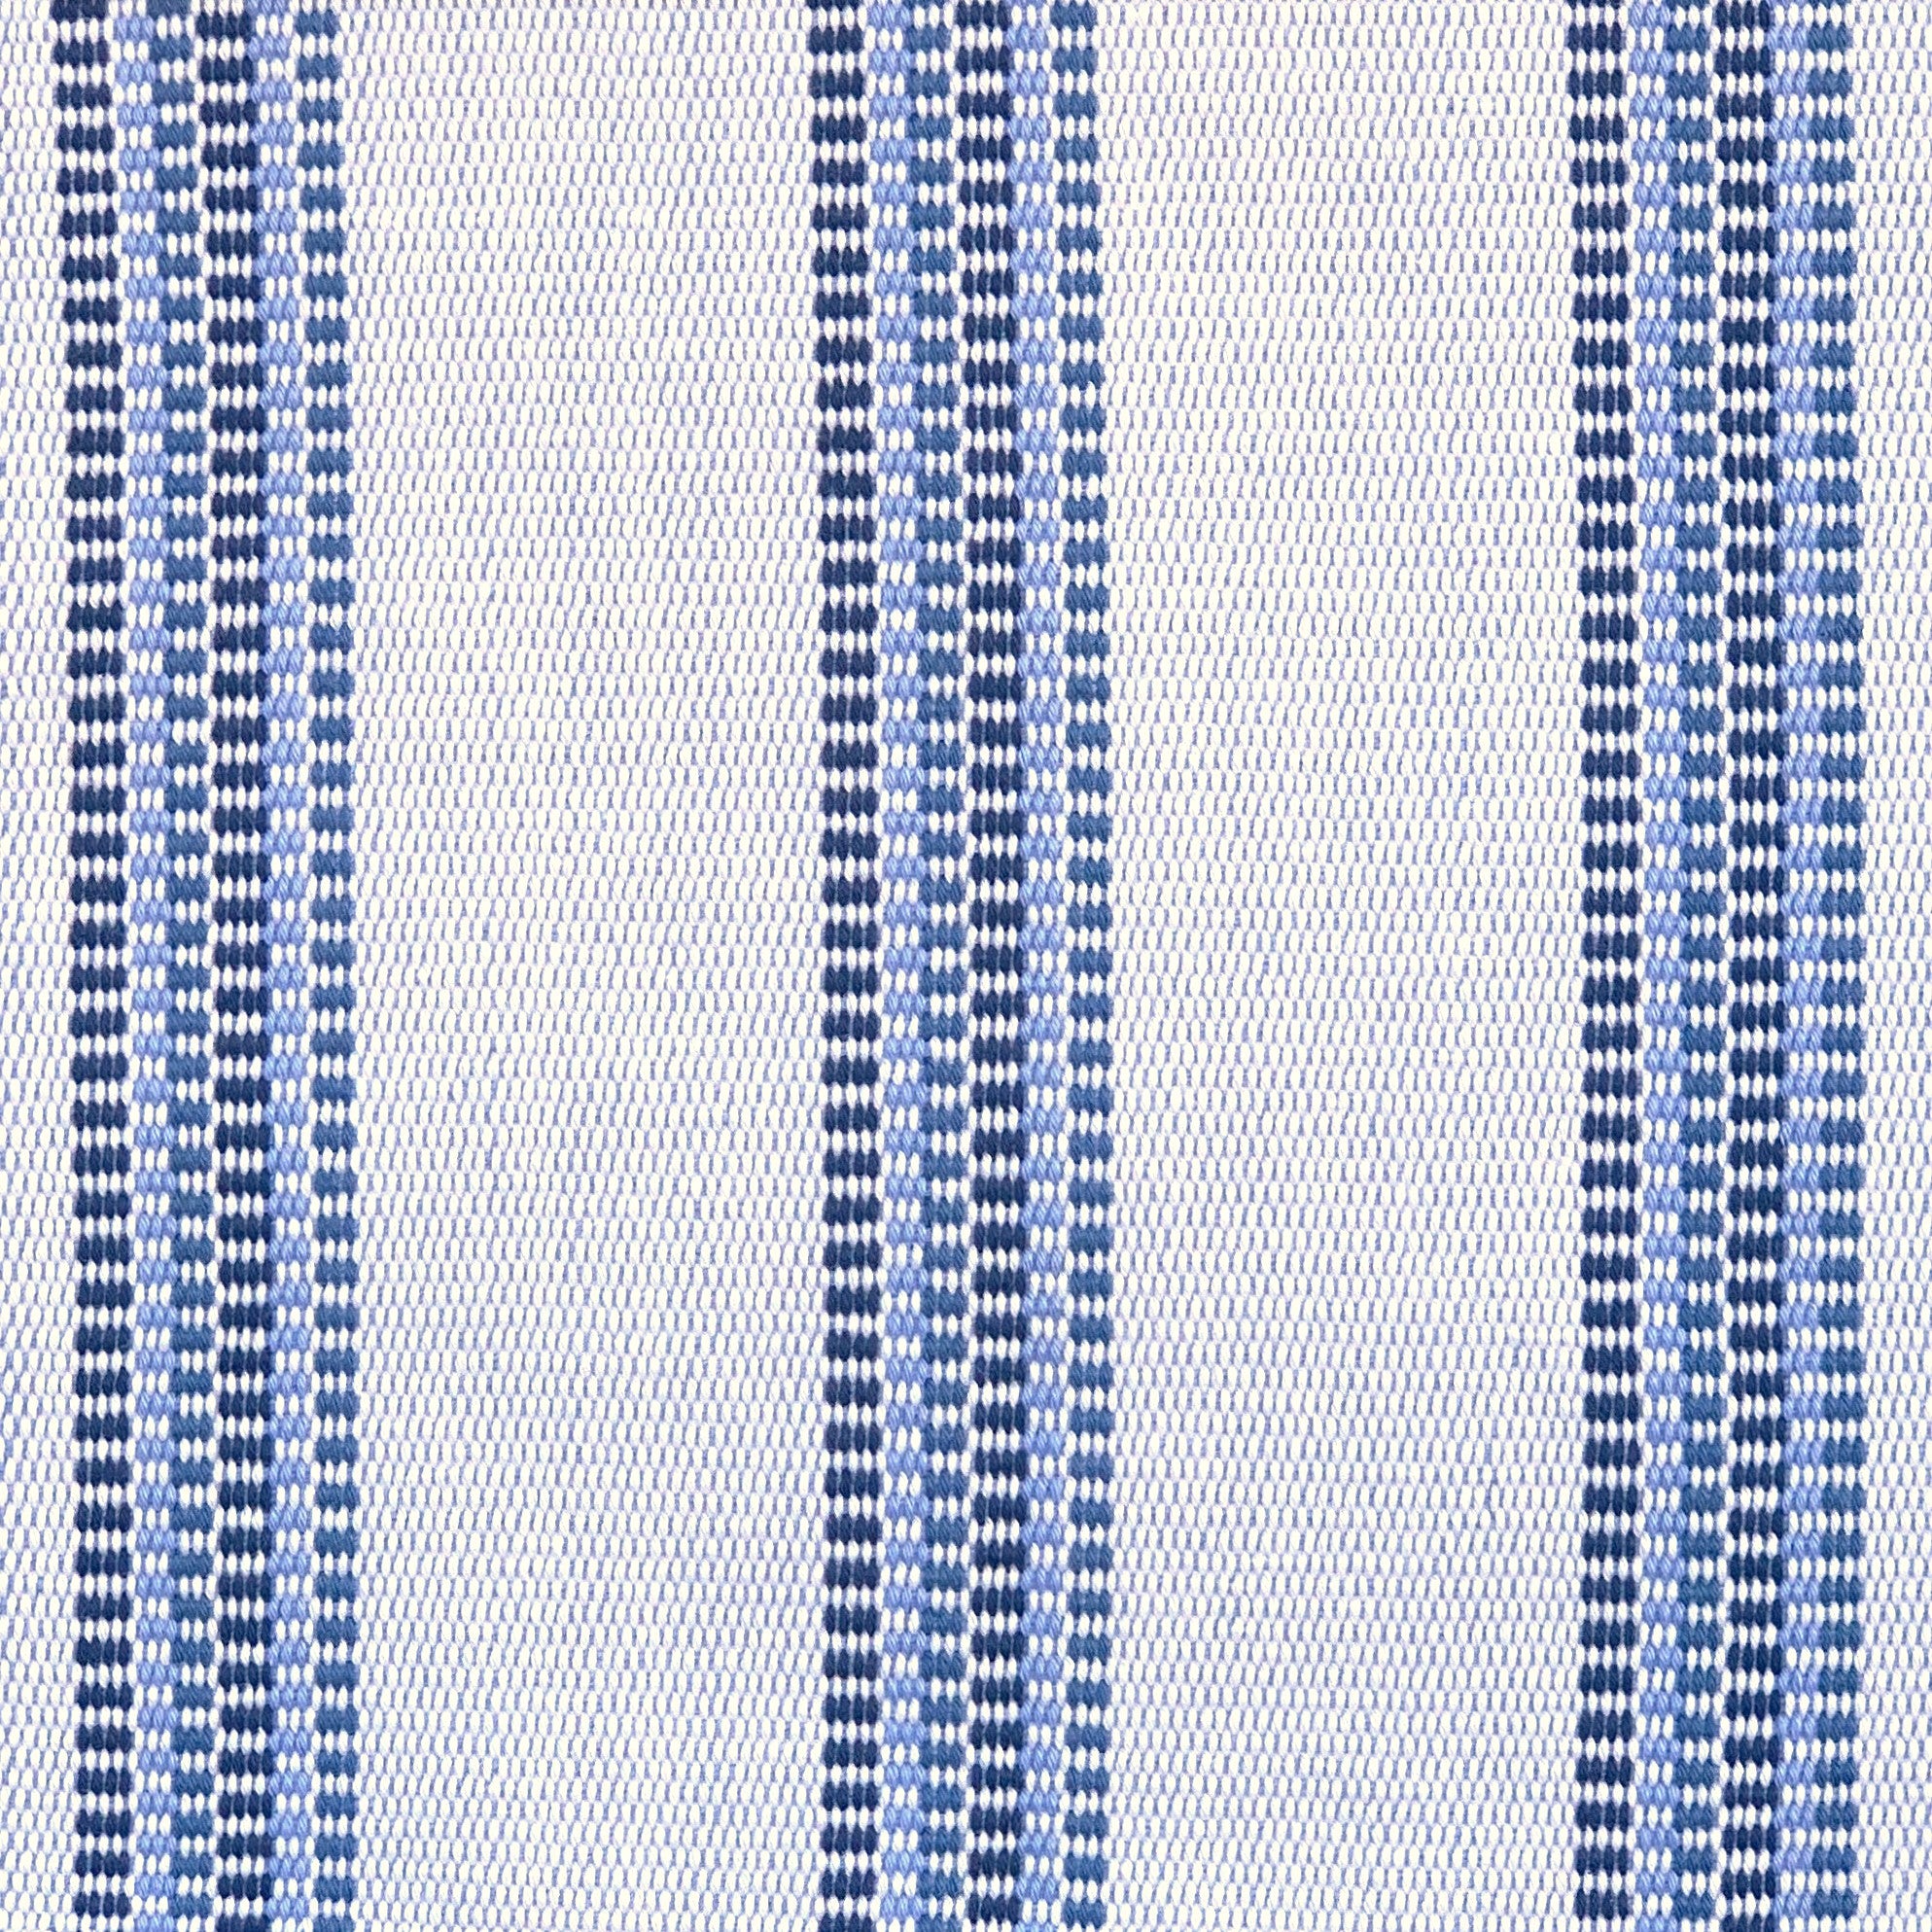 Detail of a hand-woven cotton fabric in an irregular stripe pattern in navy and blue on a white field.